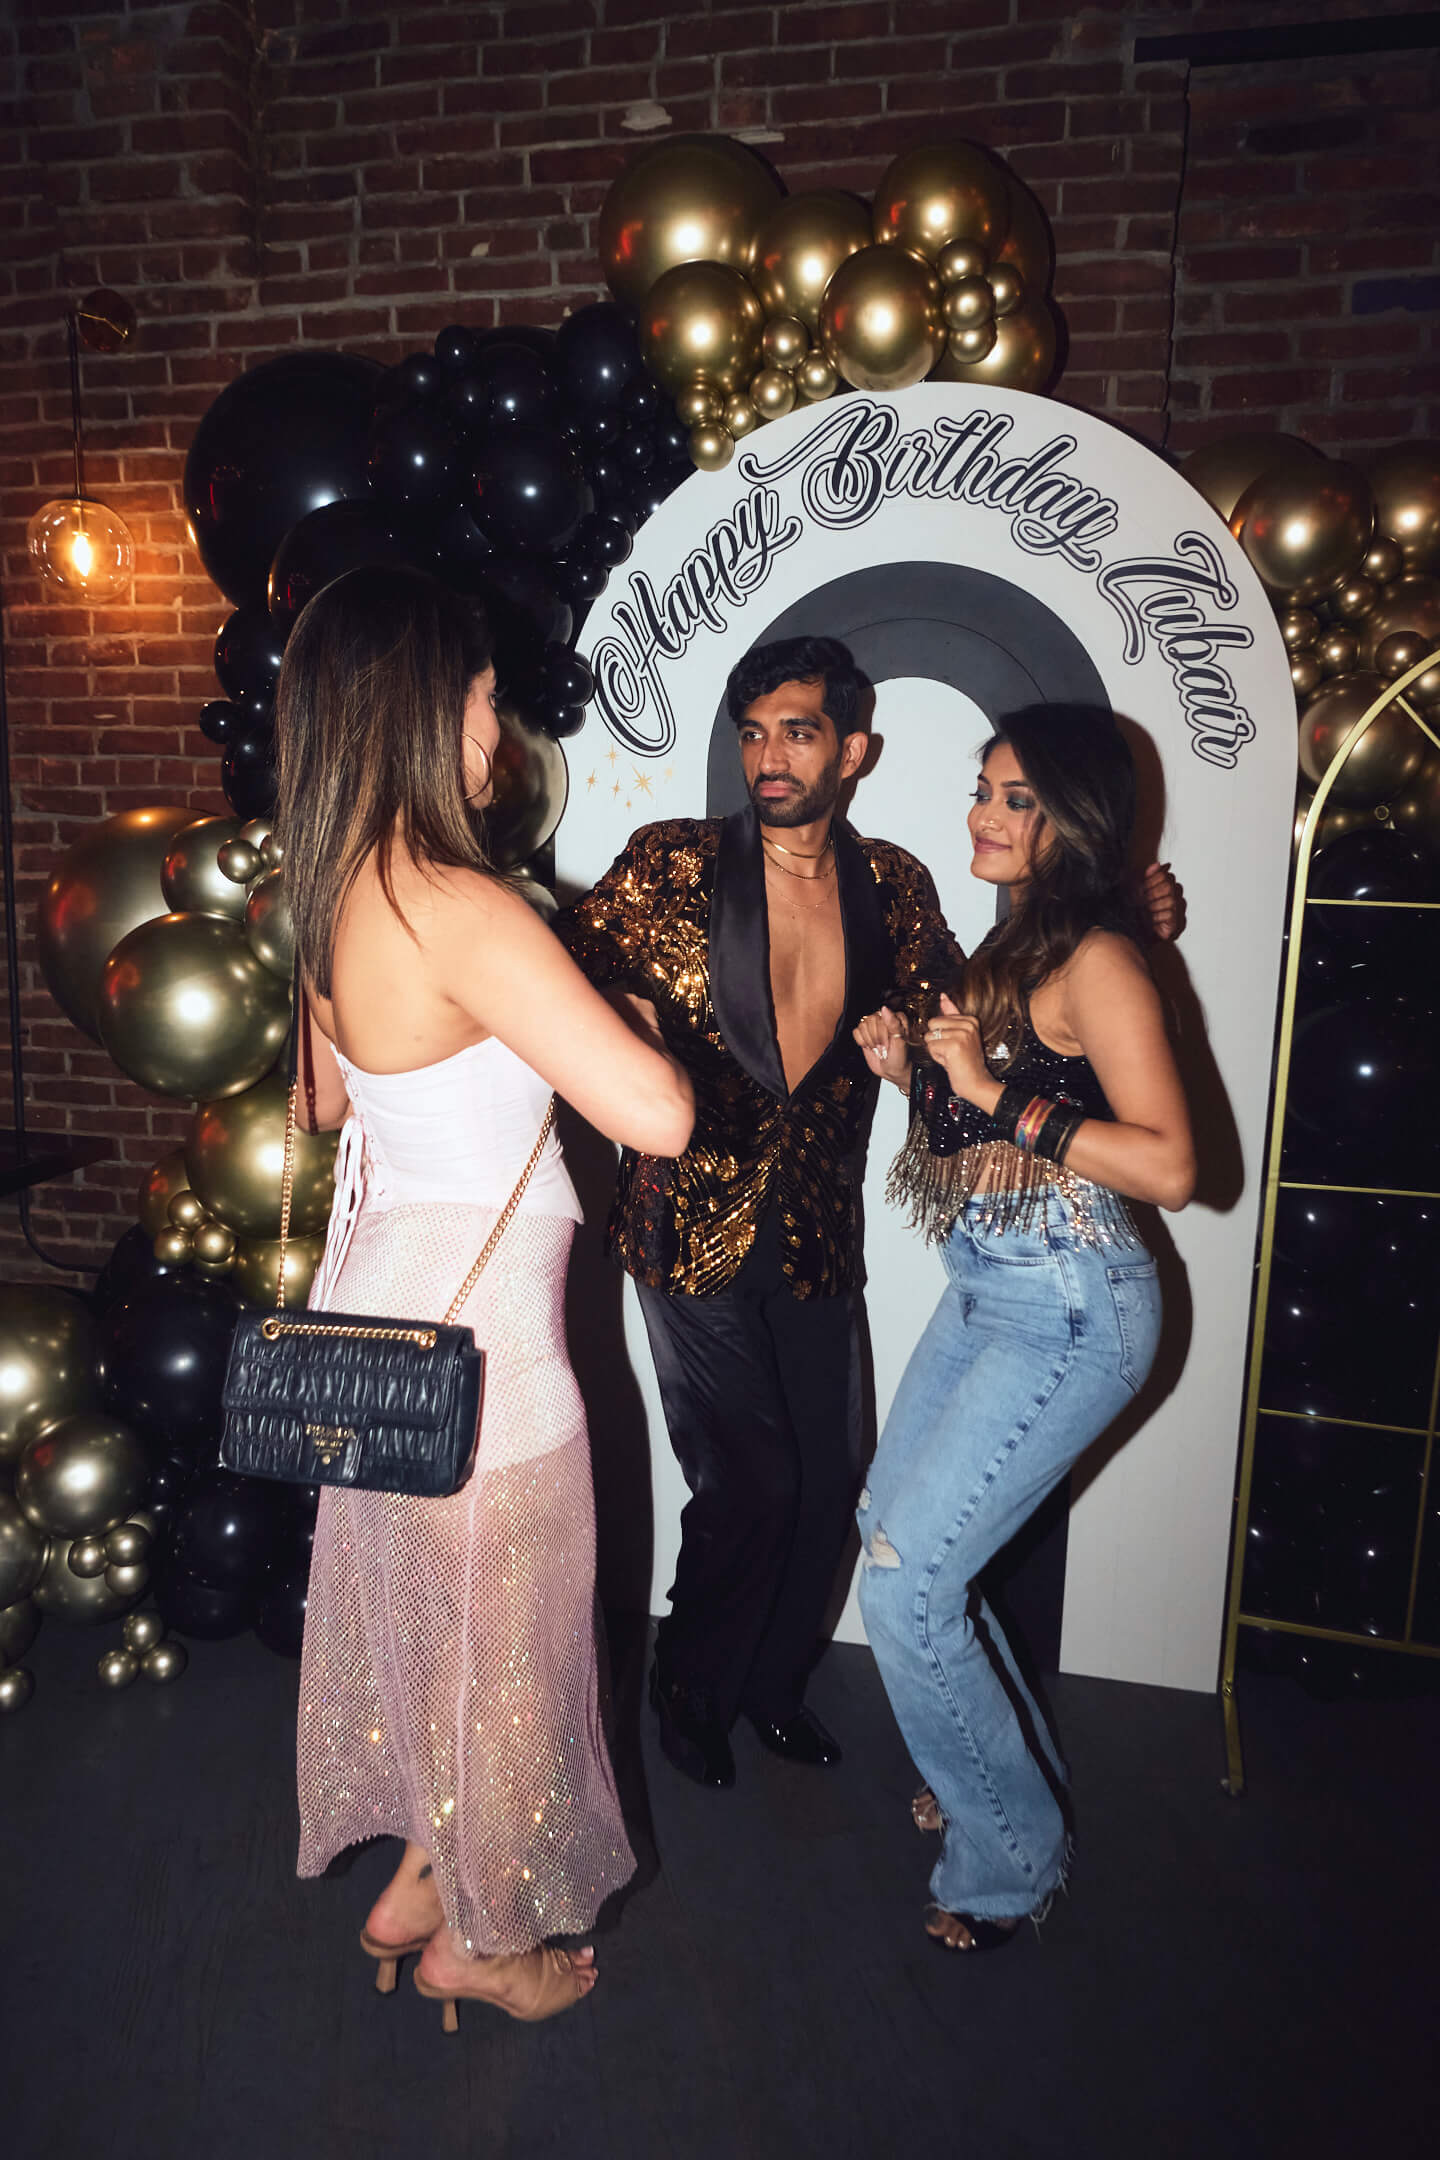 Zubair's Birthday Party - Jungly Restaurant - Event Photography - Lifestyle Photography - Long Island City, New York 